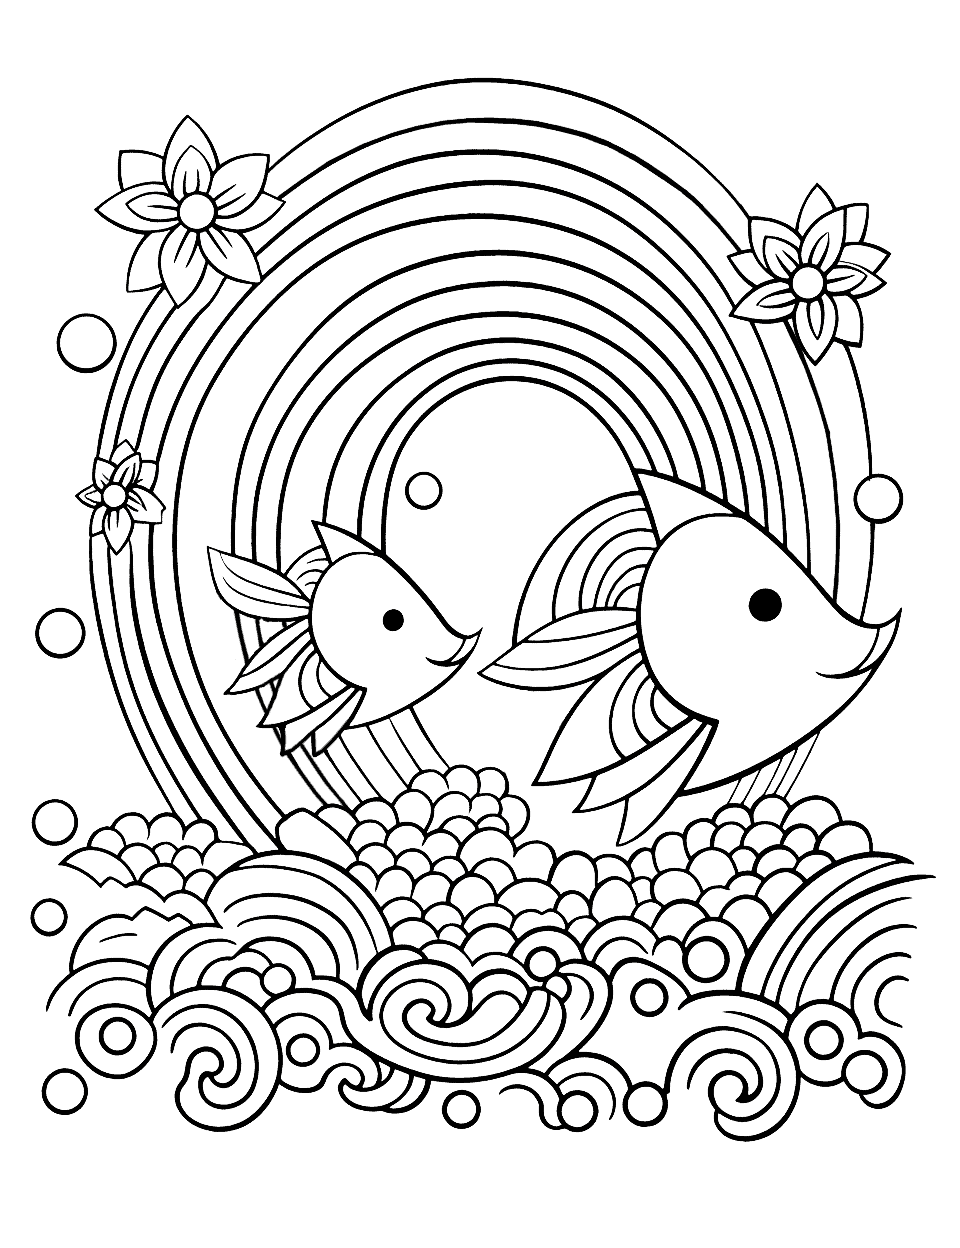 Rainbow Fish Coloring Page - A beautiful rainbow-colored fish swimming with its friends.